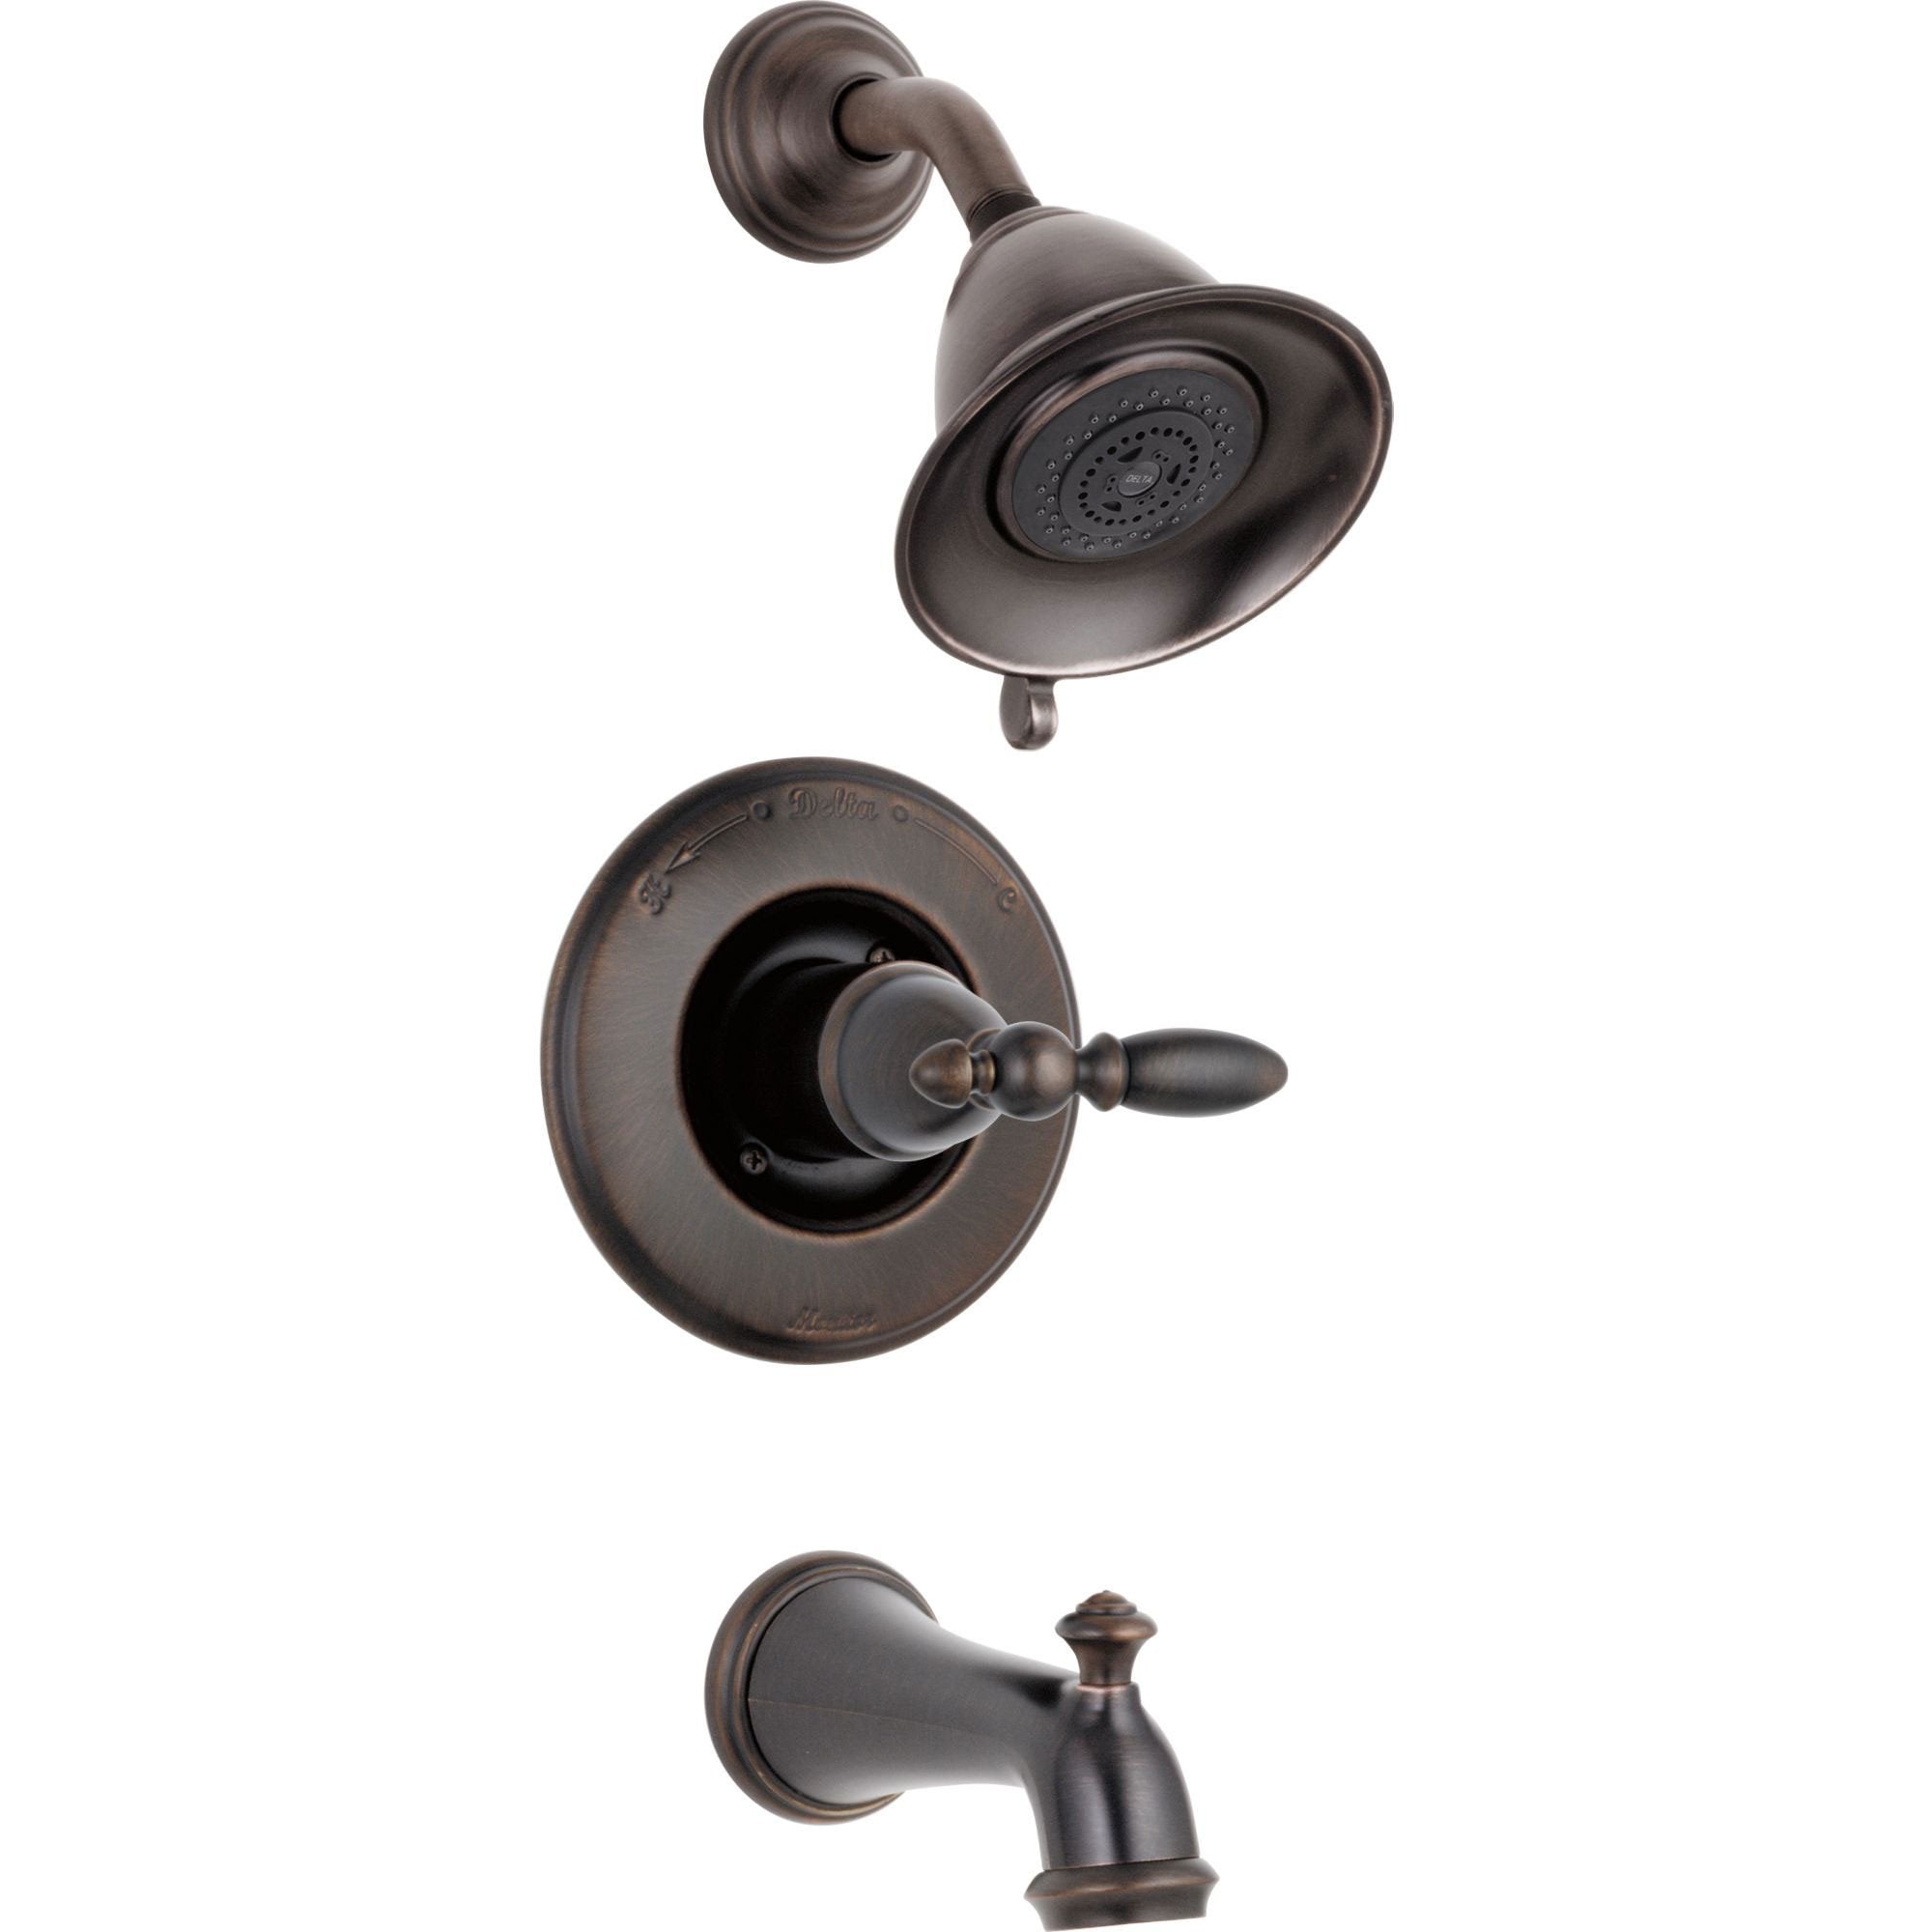 Delta Traditional Victorian Venetian Bronze Finish 14 Series Tub and Shower Faucet Combo INCLUDES Rough-in Valve with Stops and Single Lever Handle D1183V